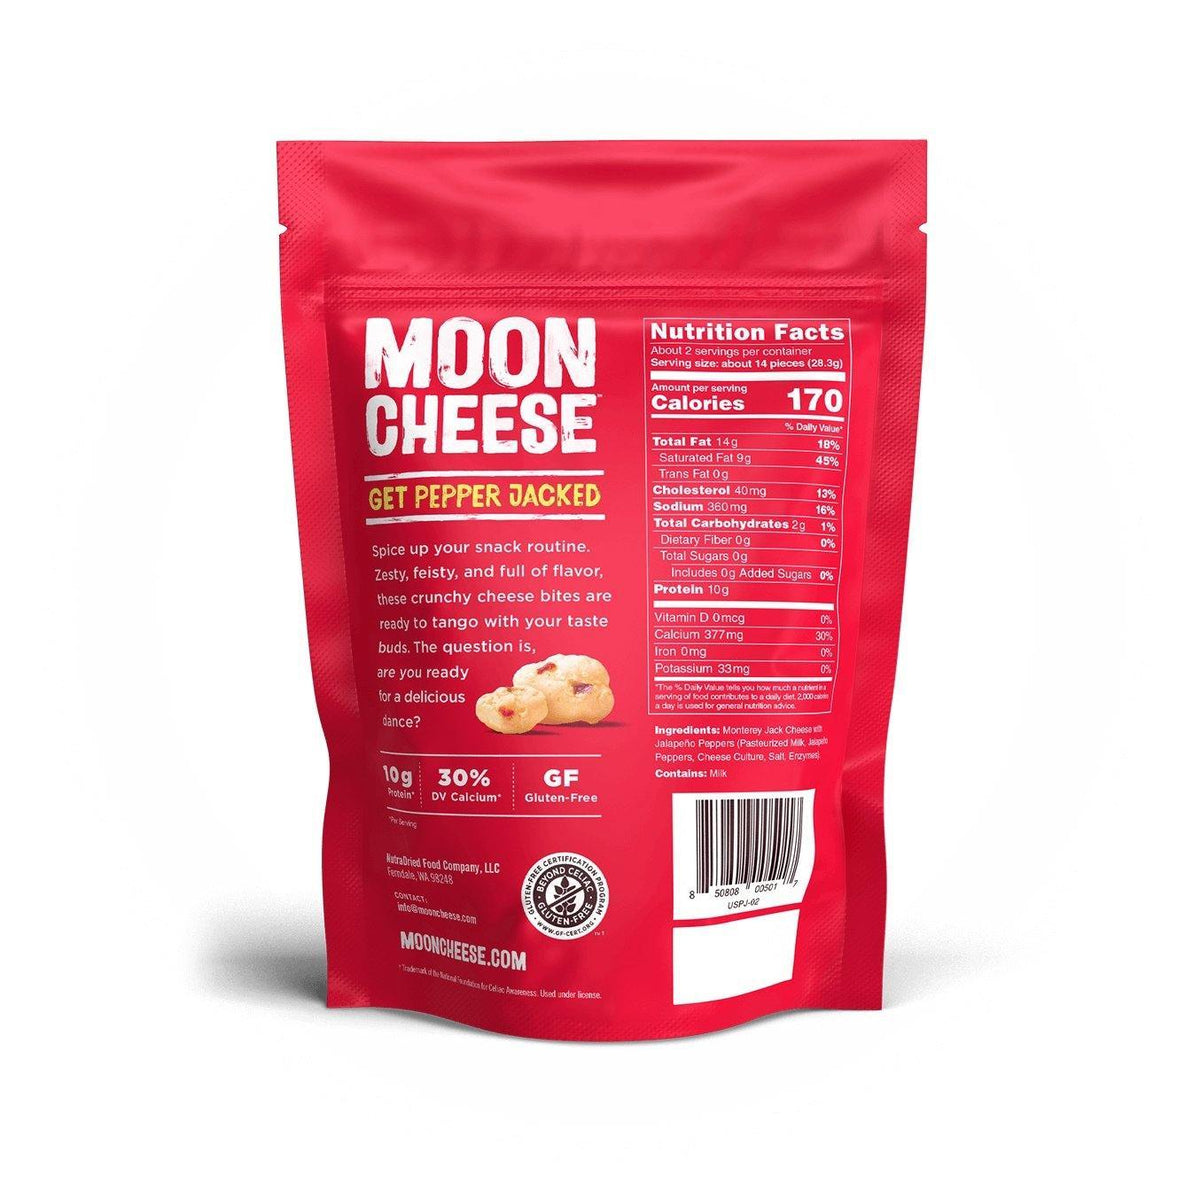 [Moon Cheese] Get Pepper Jacked I 1oz or 2 oz bags exclusive at